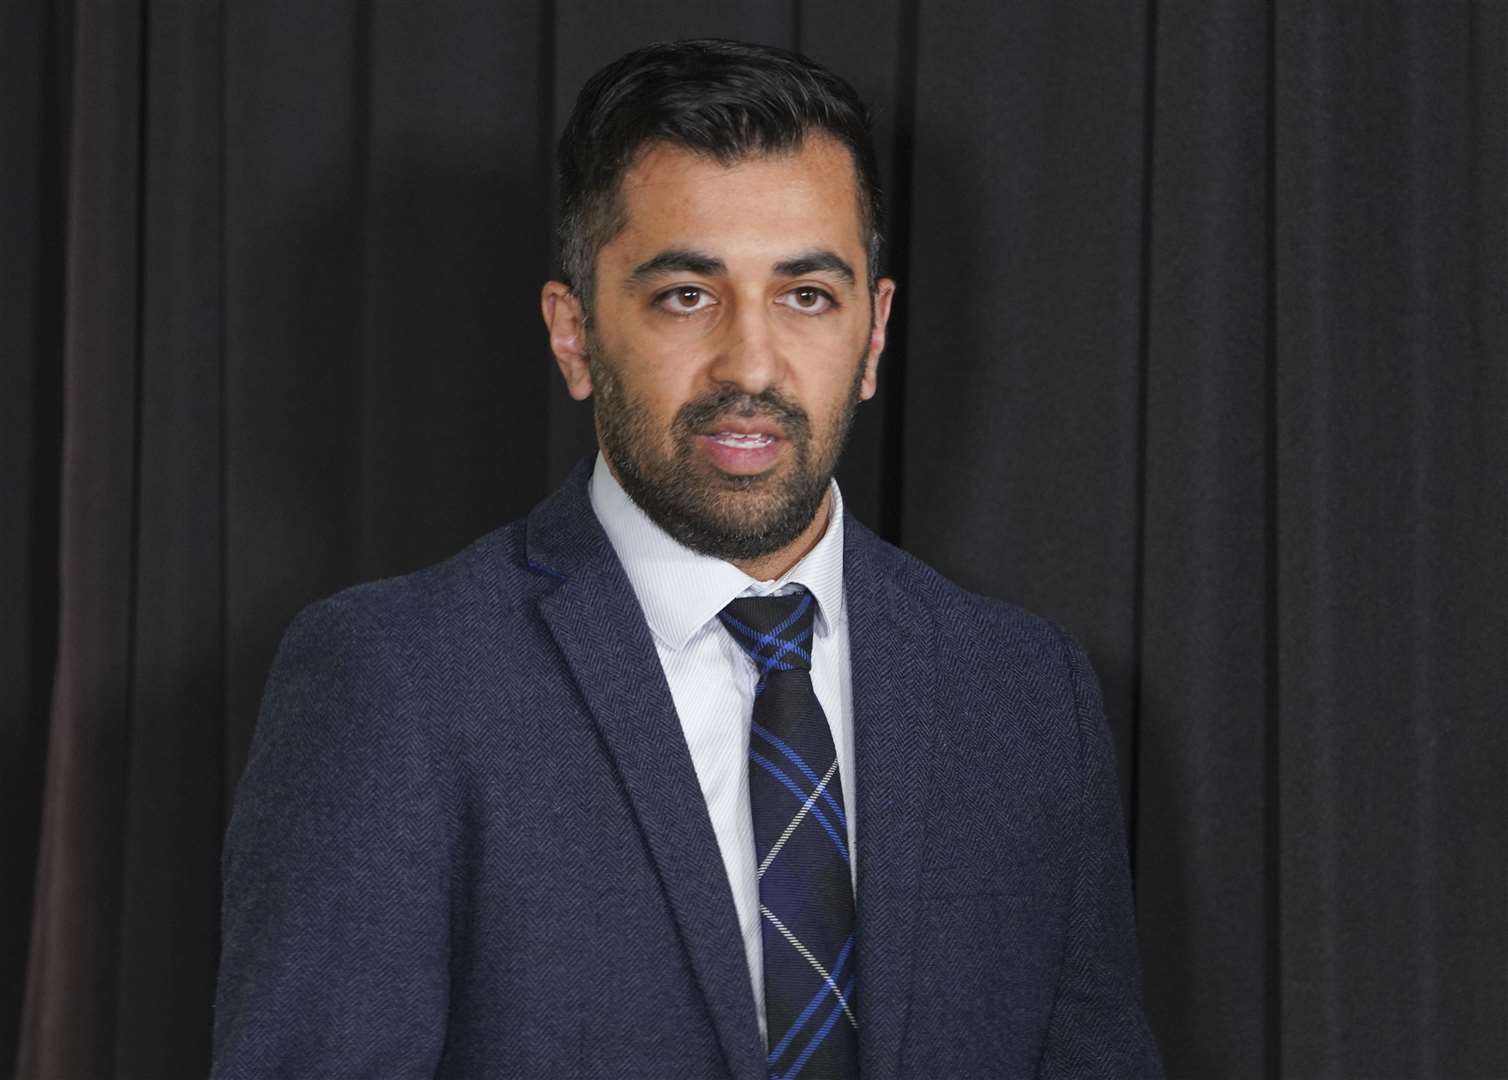 Scottish Government health secretary Humza Yousaf launches winter ‘Healthy Know How’ campaign.